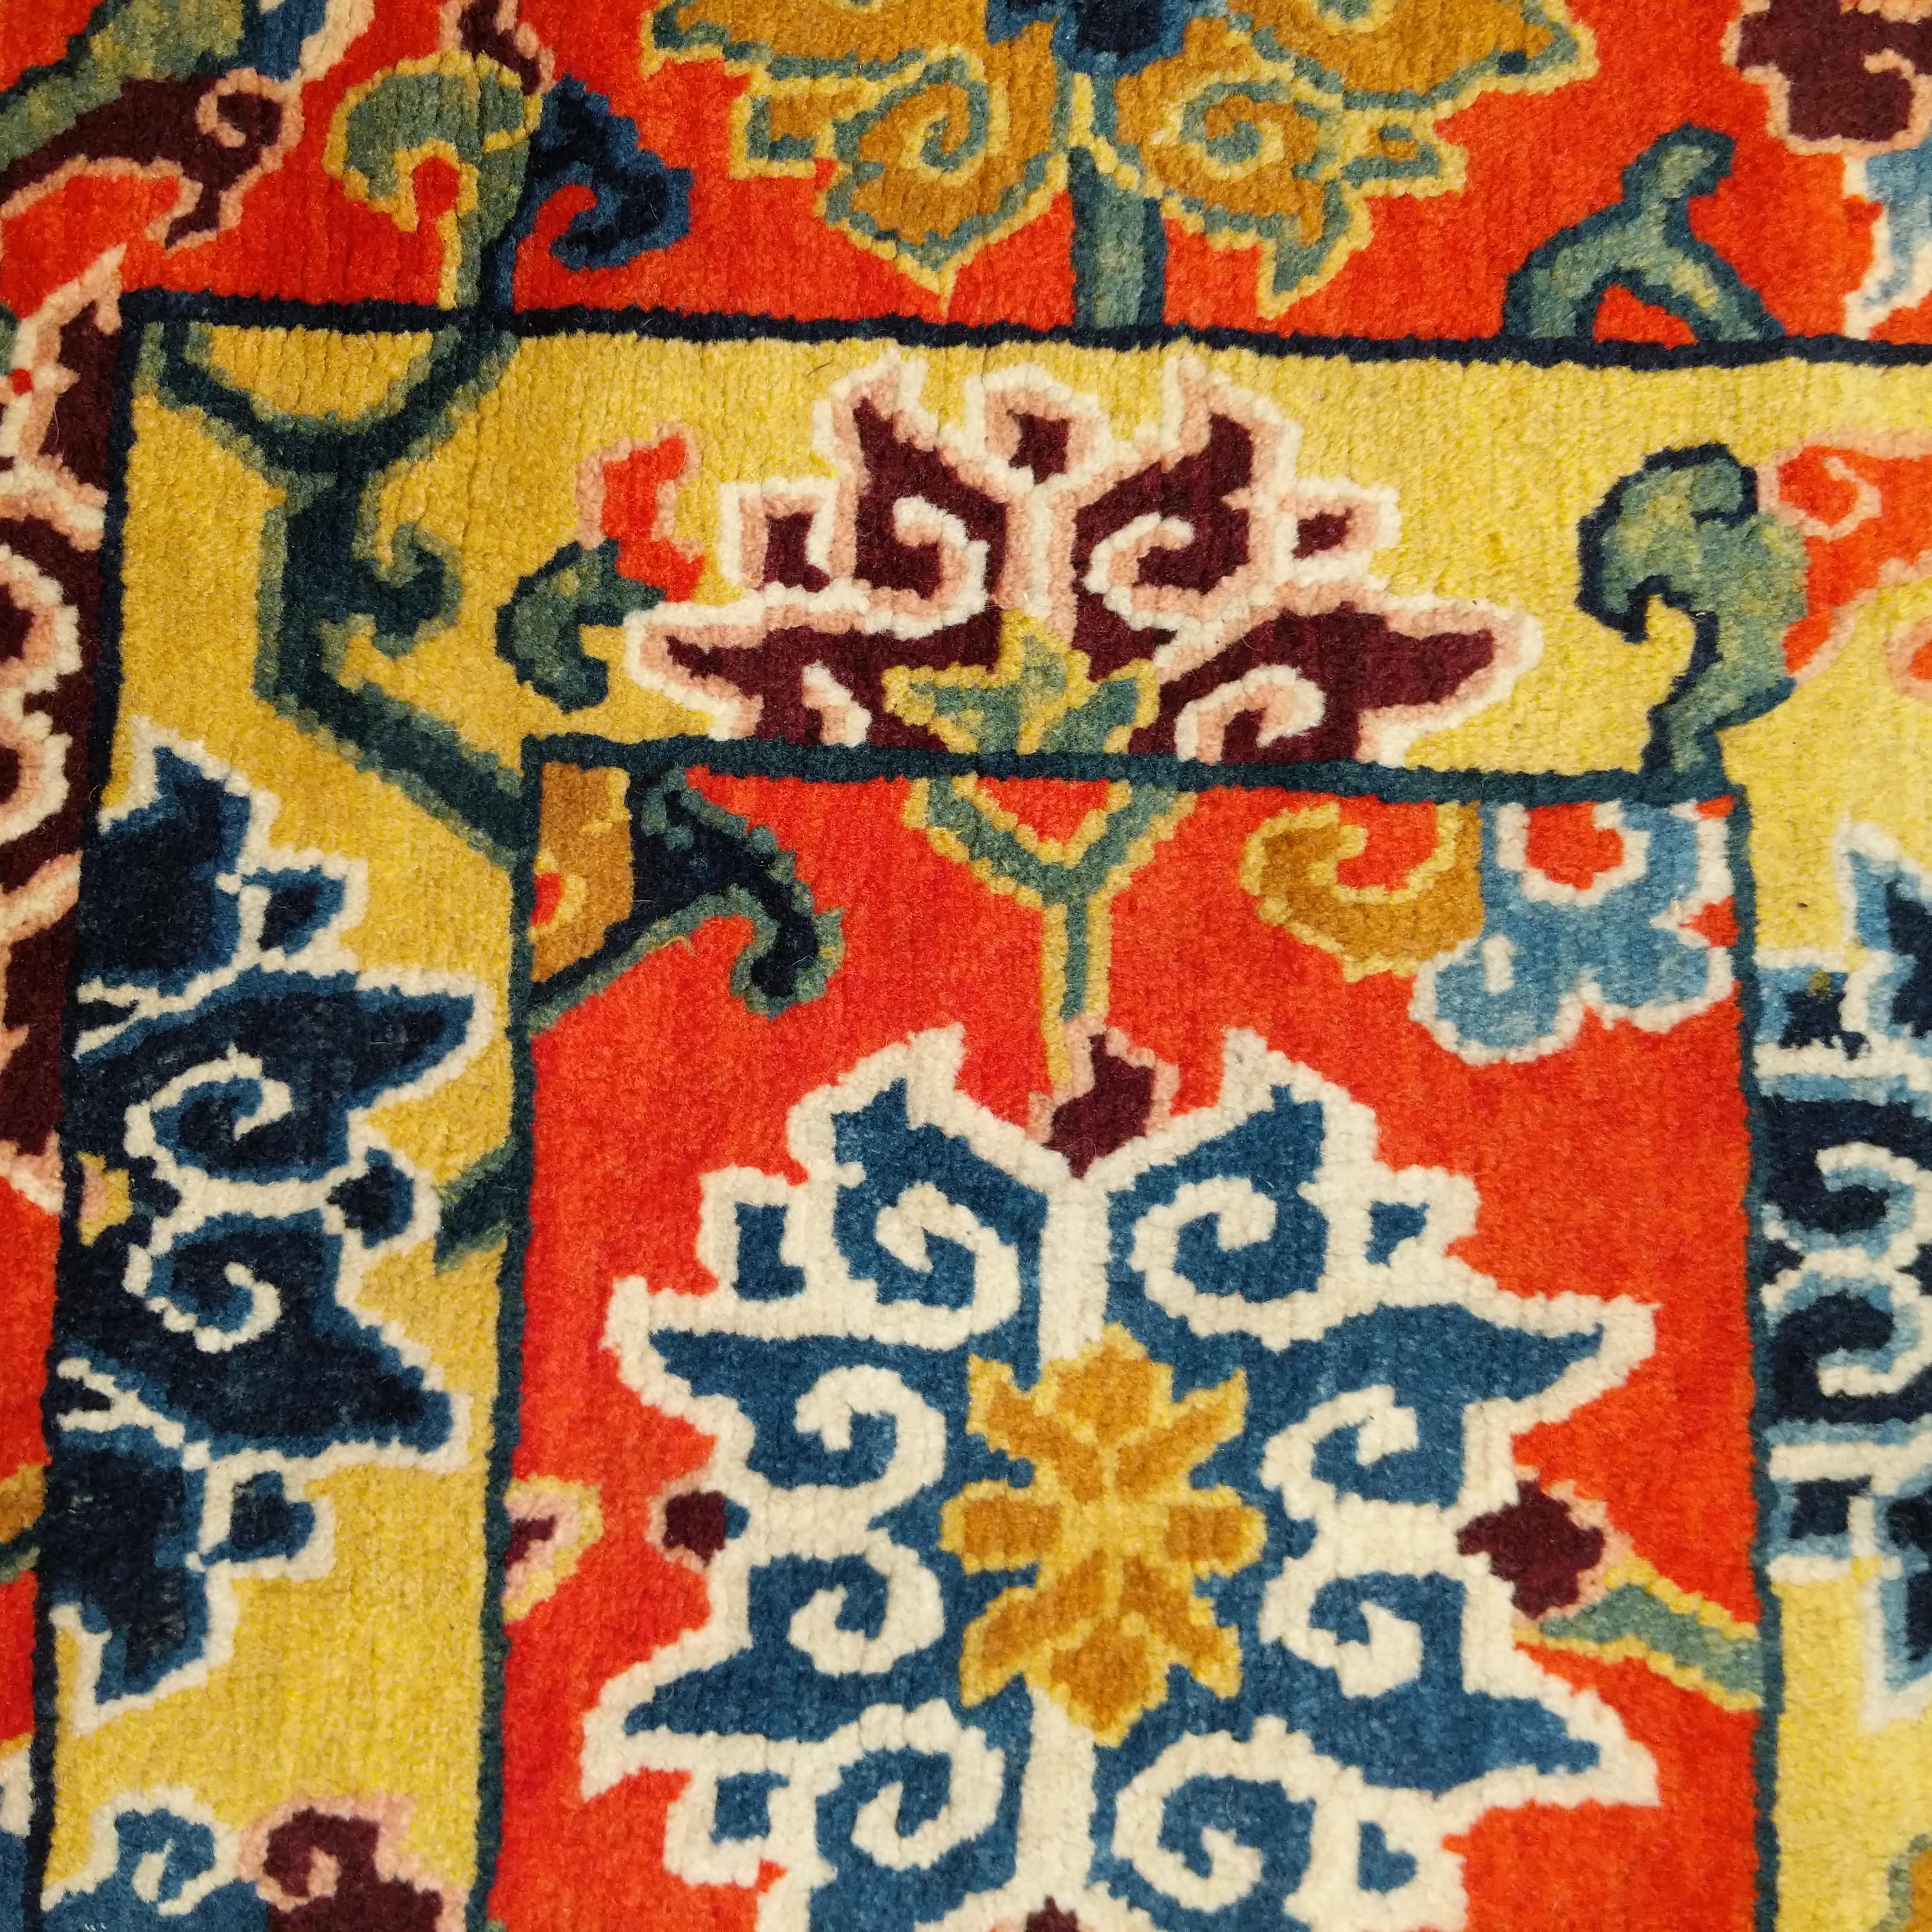 Hand-Knotted Antique Tibetan Meditation Rug for a High Lama For Sale